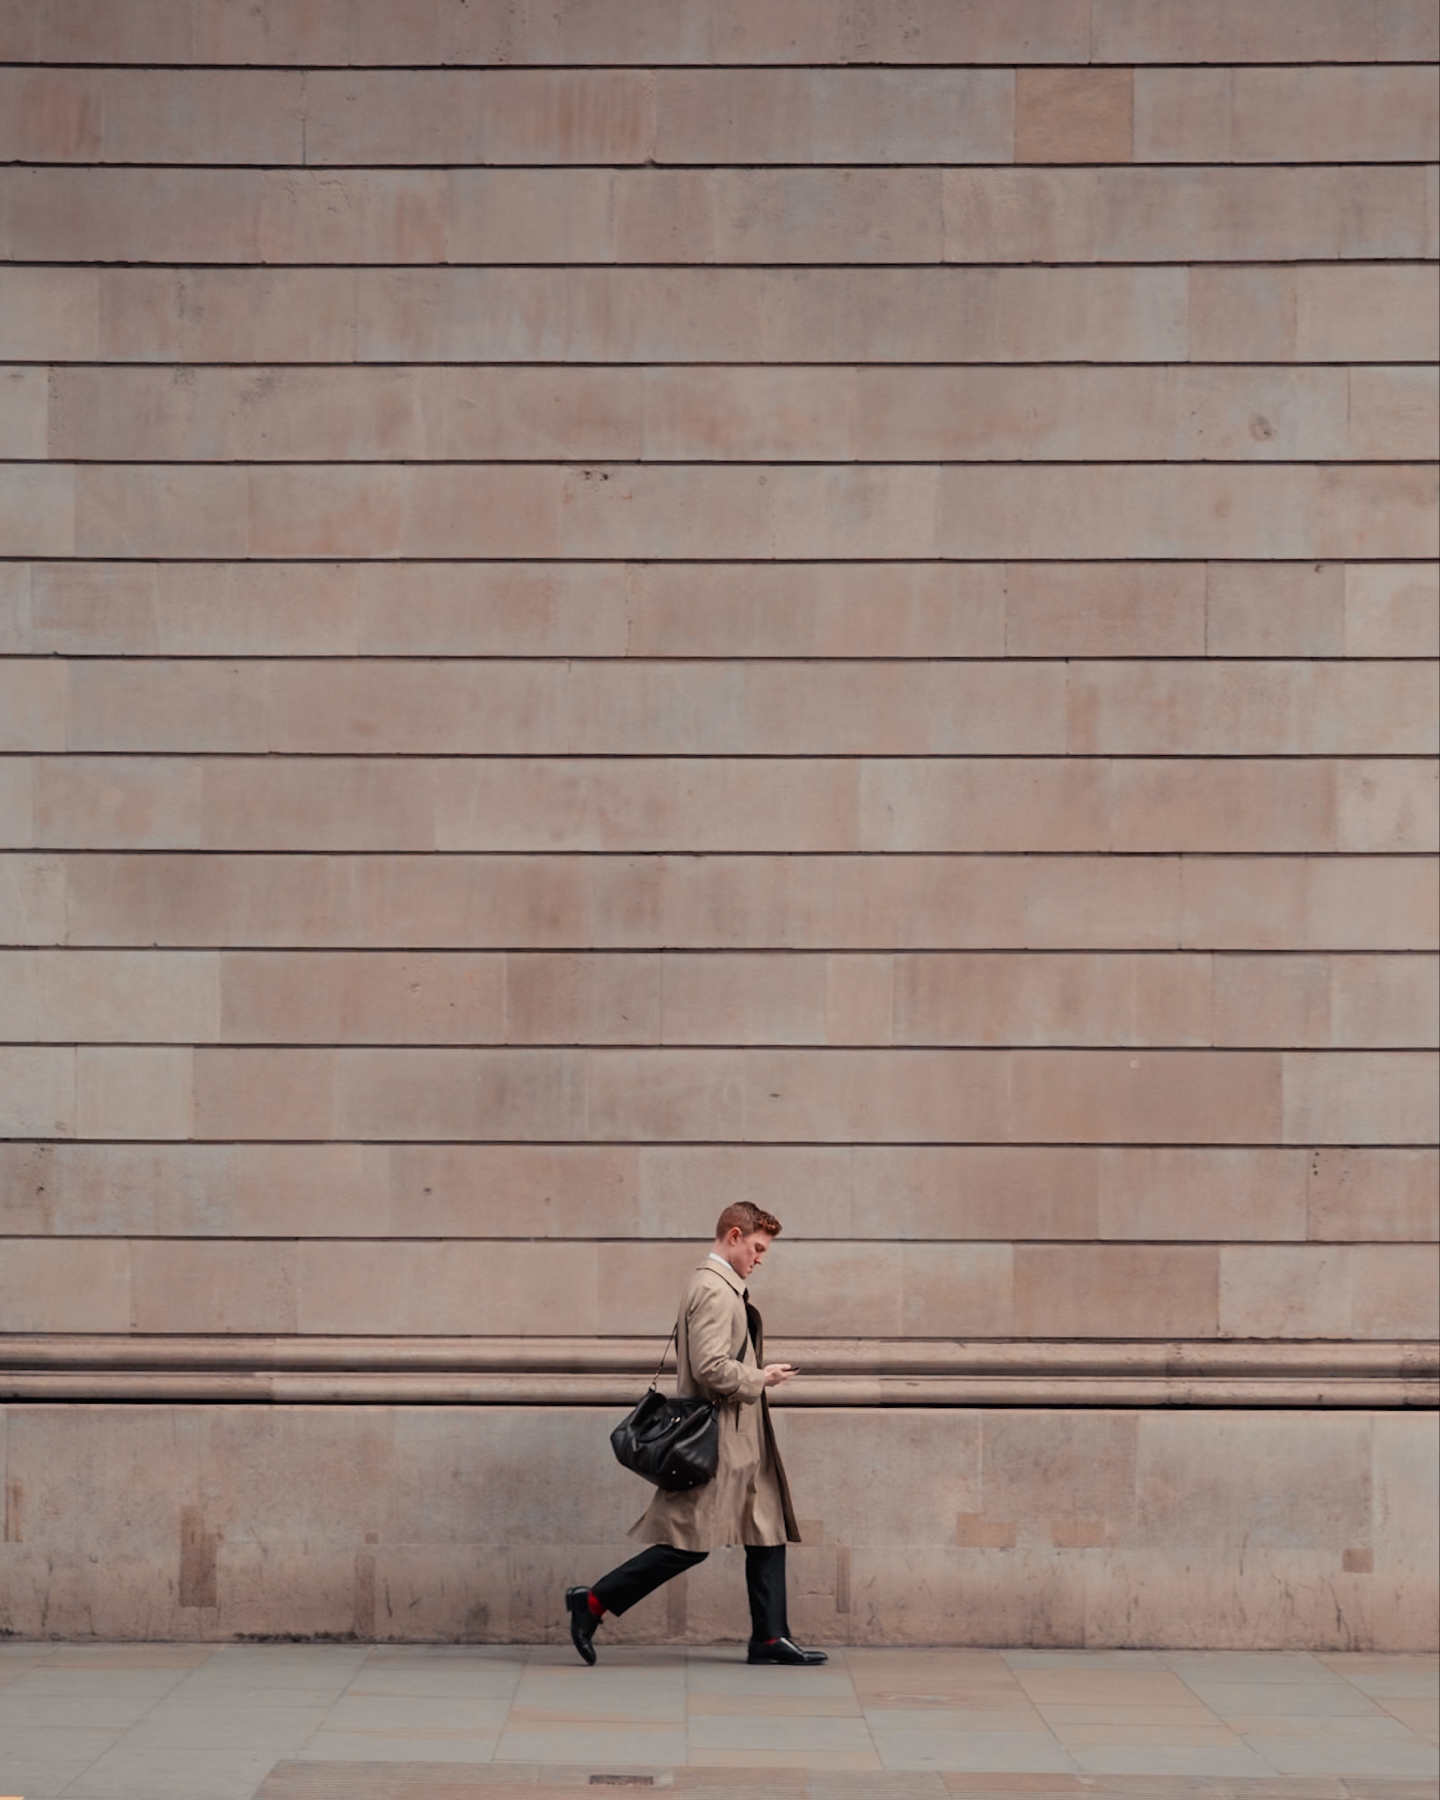 a sole business man looking small against a giant plain wall